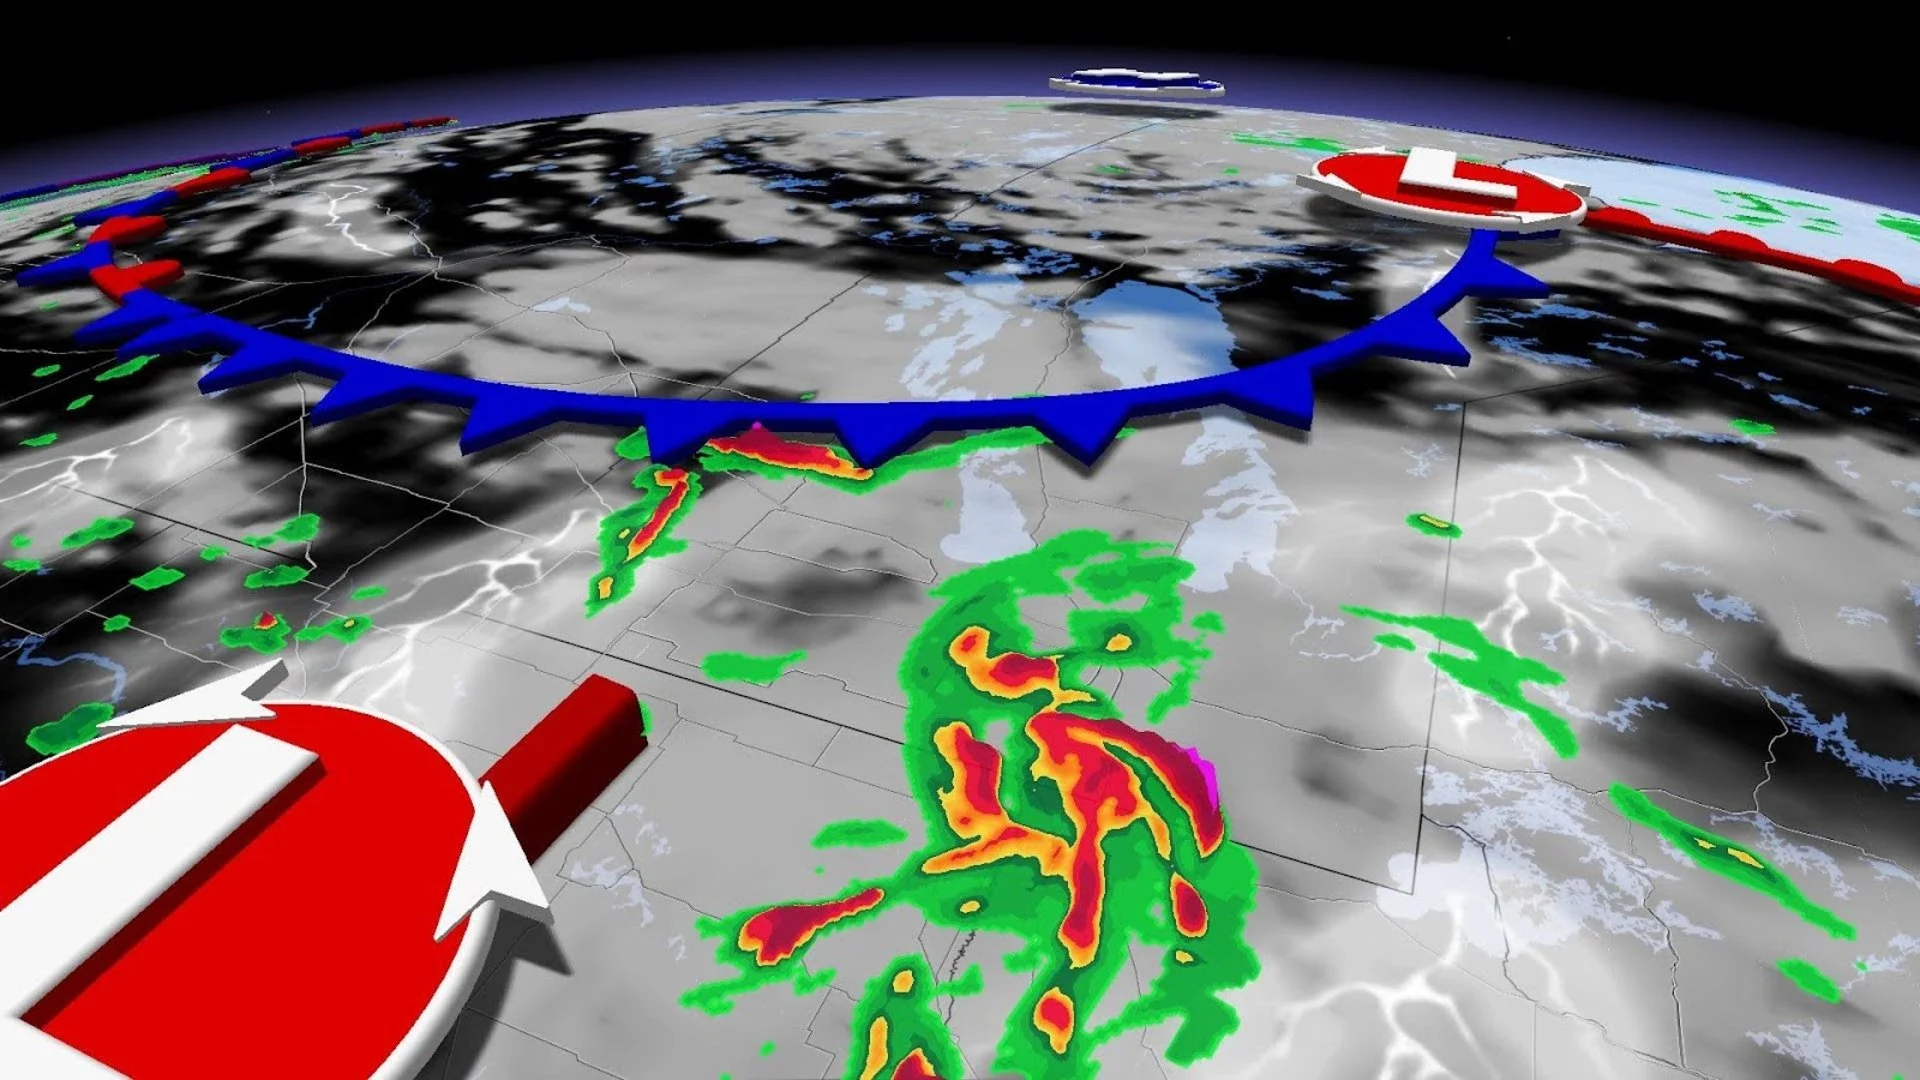 Carefully watching Sunday severe storm risk on eastern Prairies